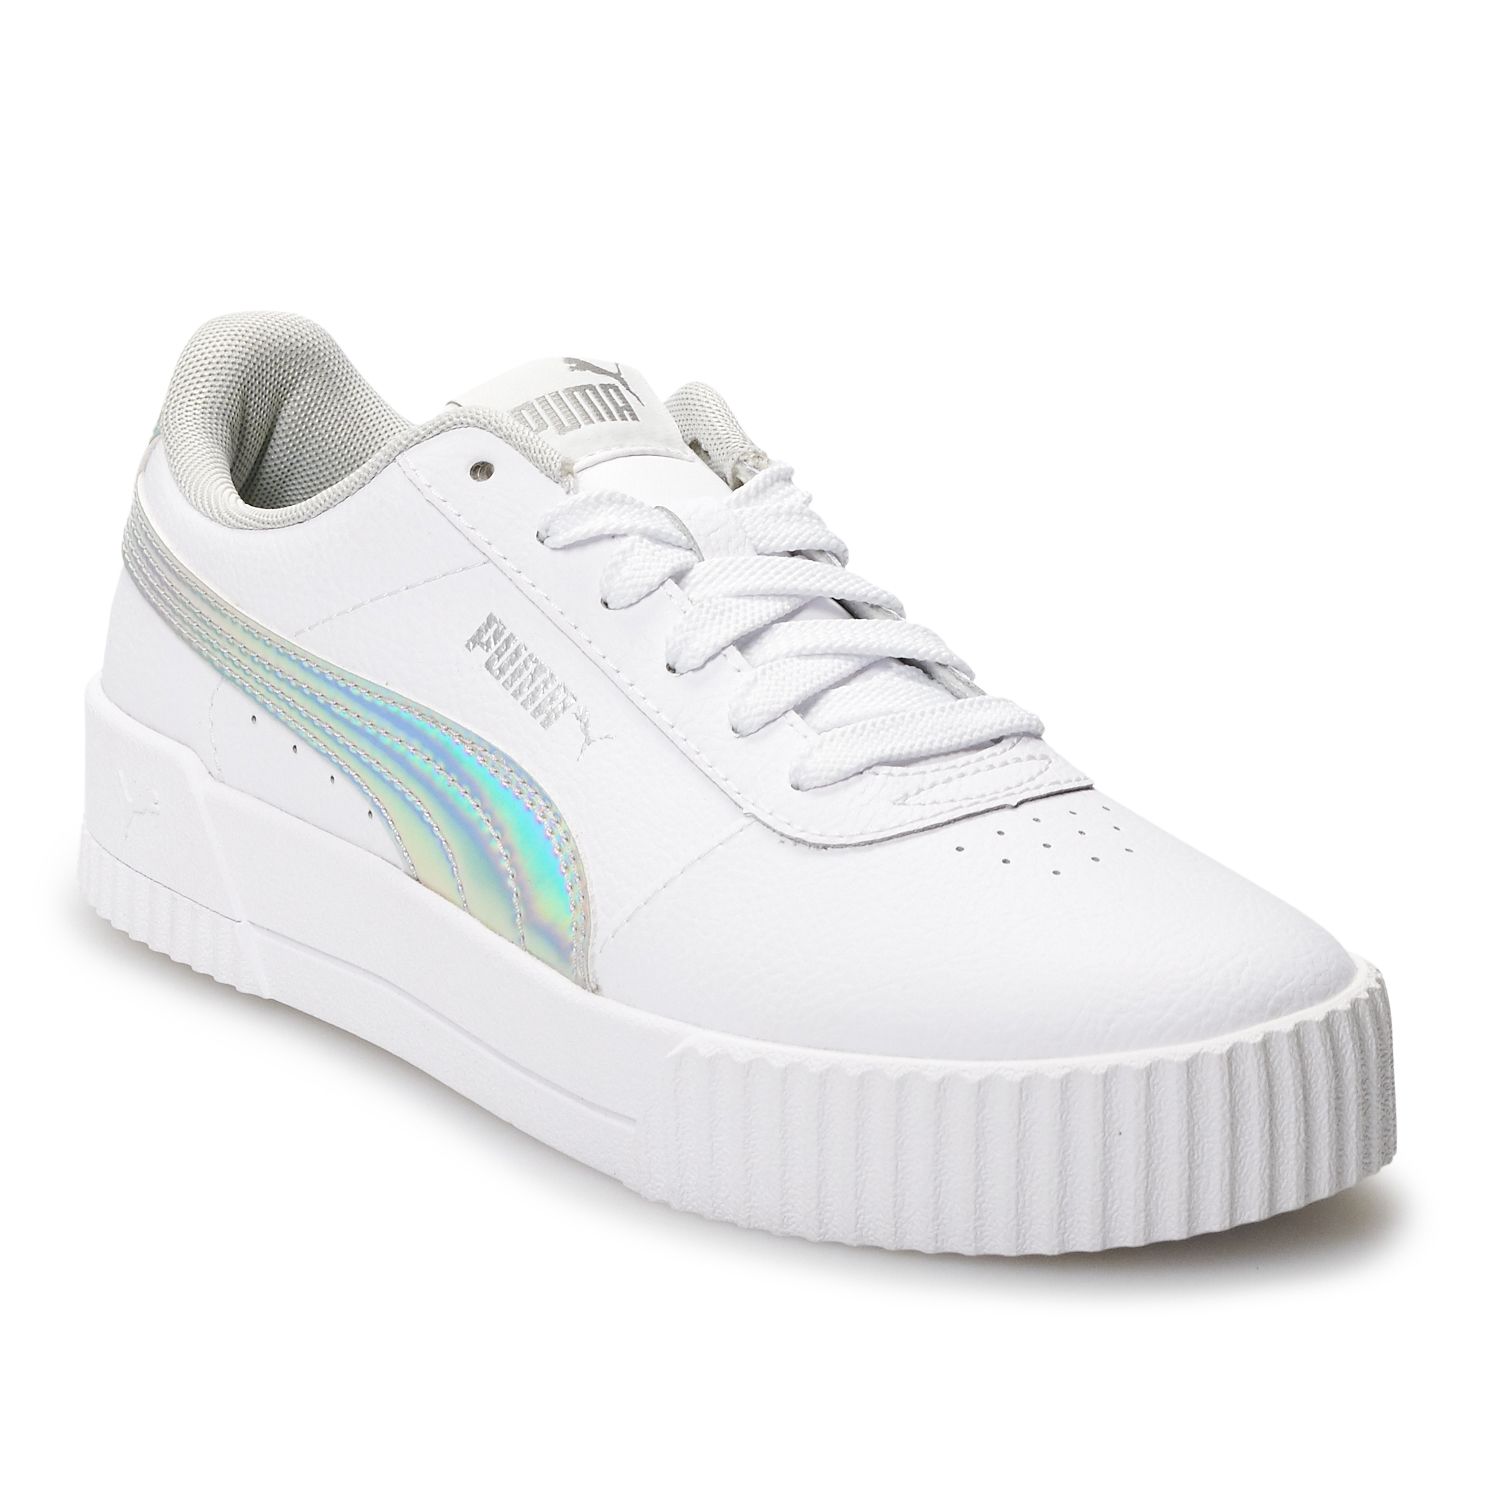 puma sneakers for girl